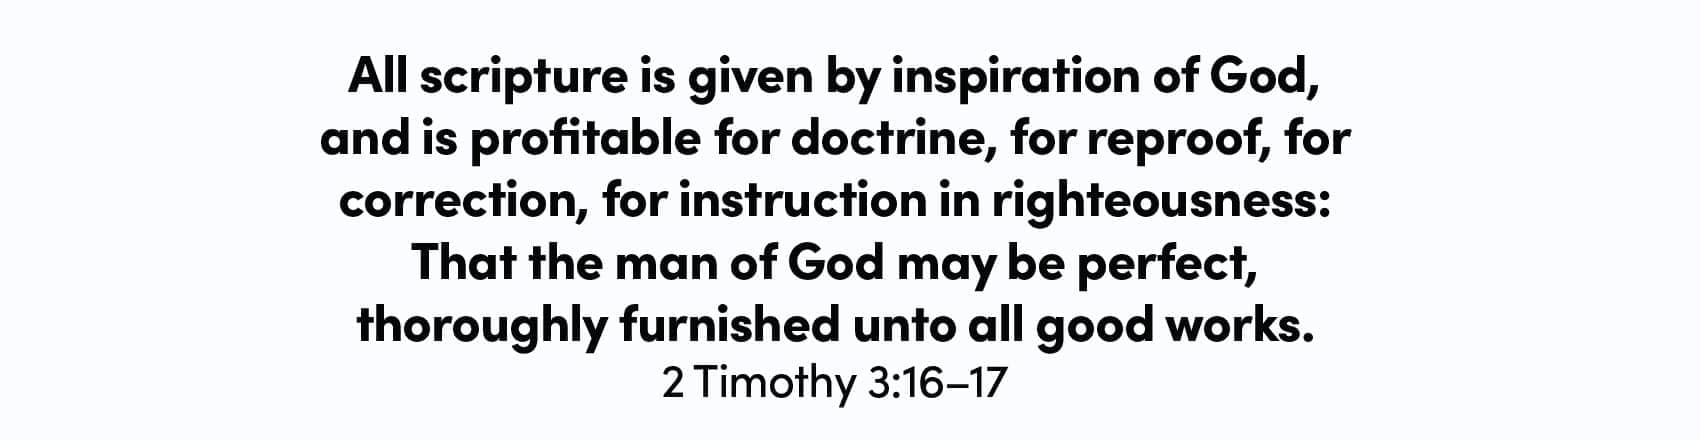 All scripture is given by inspiration of God, and is profitable for doctrine, for reproof, for correction, for instruction in righteousness: That the man of God may be perfect, thoroughly furnished unto all good works.